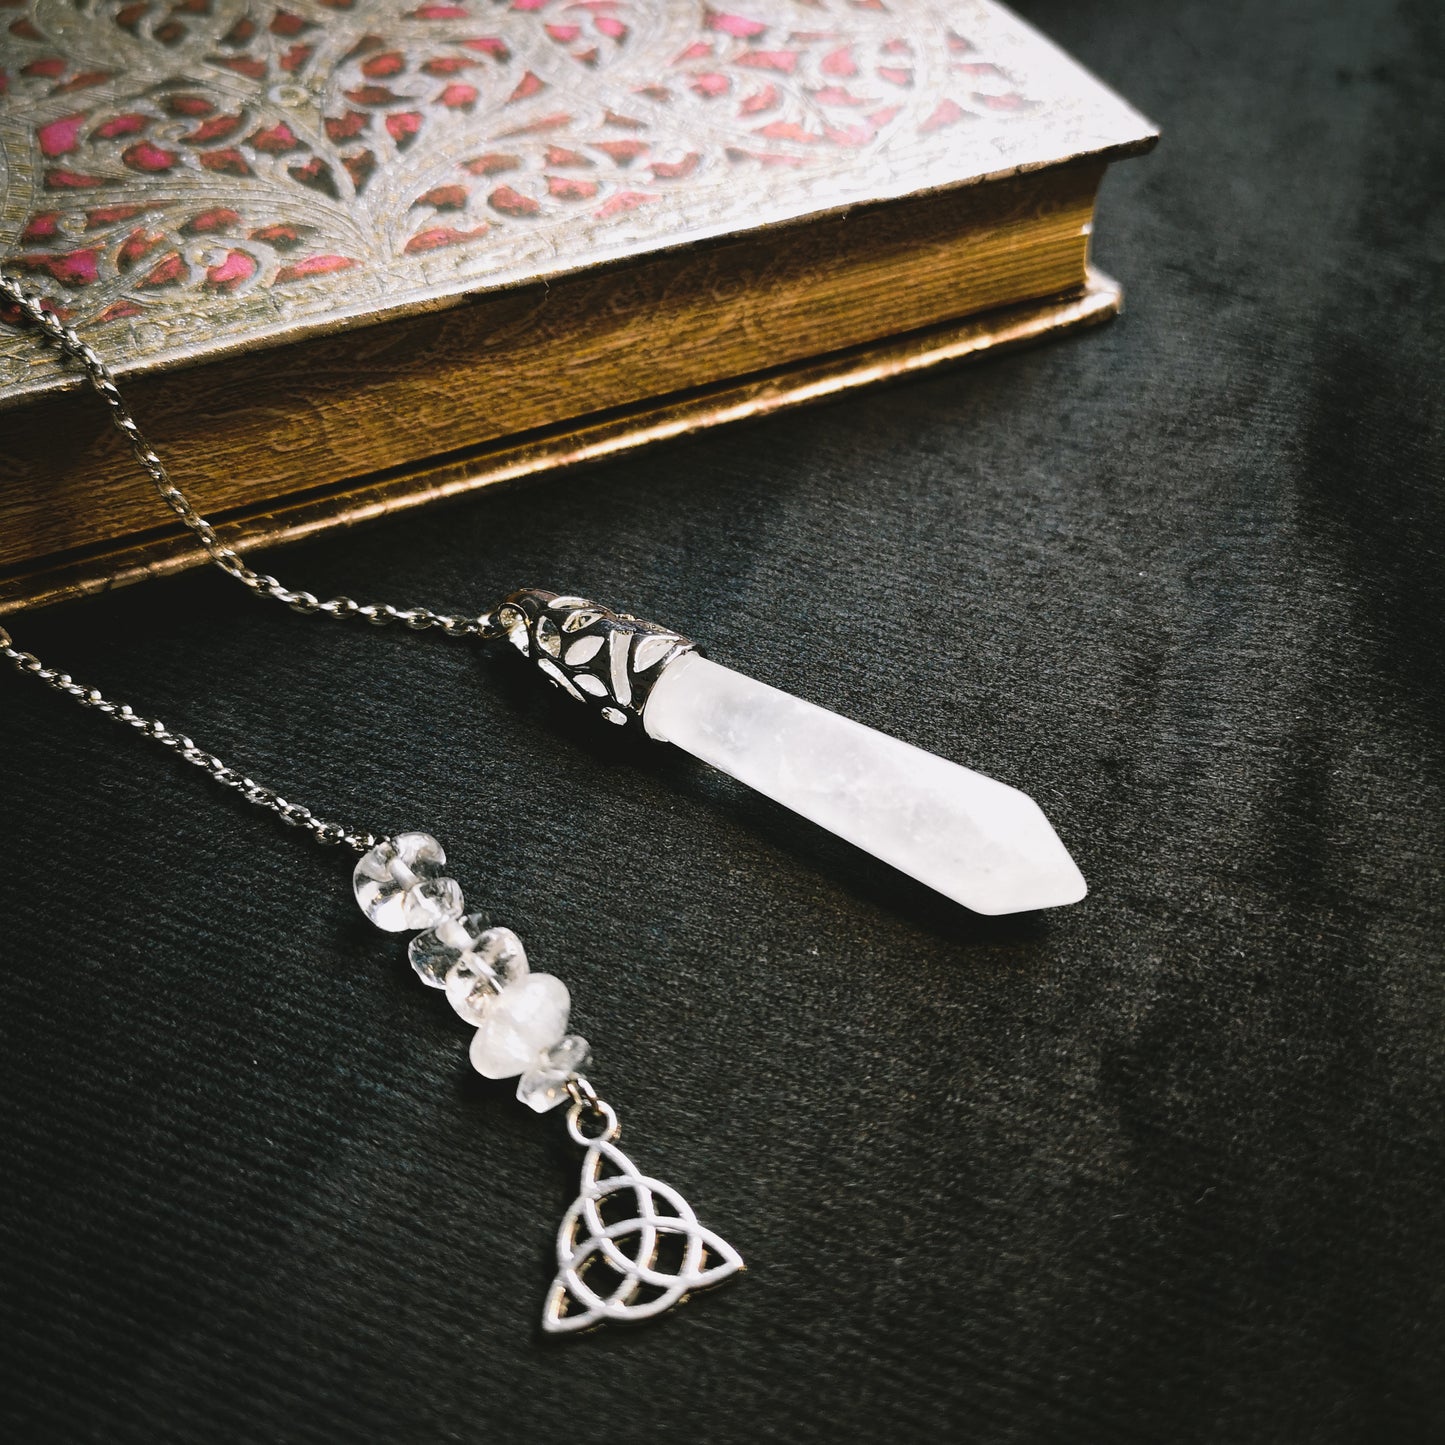 Clear quartz and triquetra pendulum - The French Witch shop